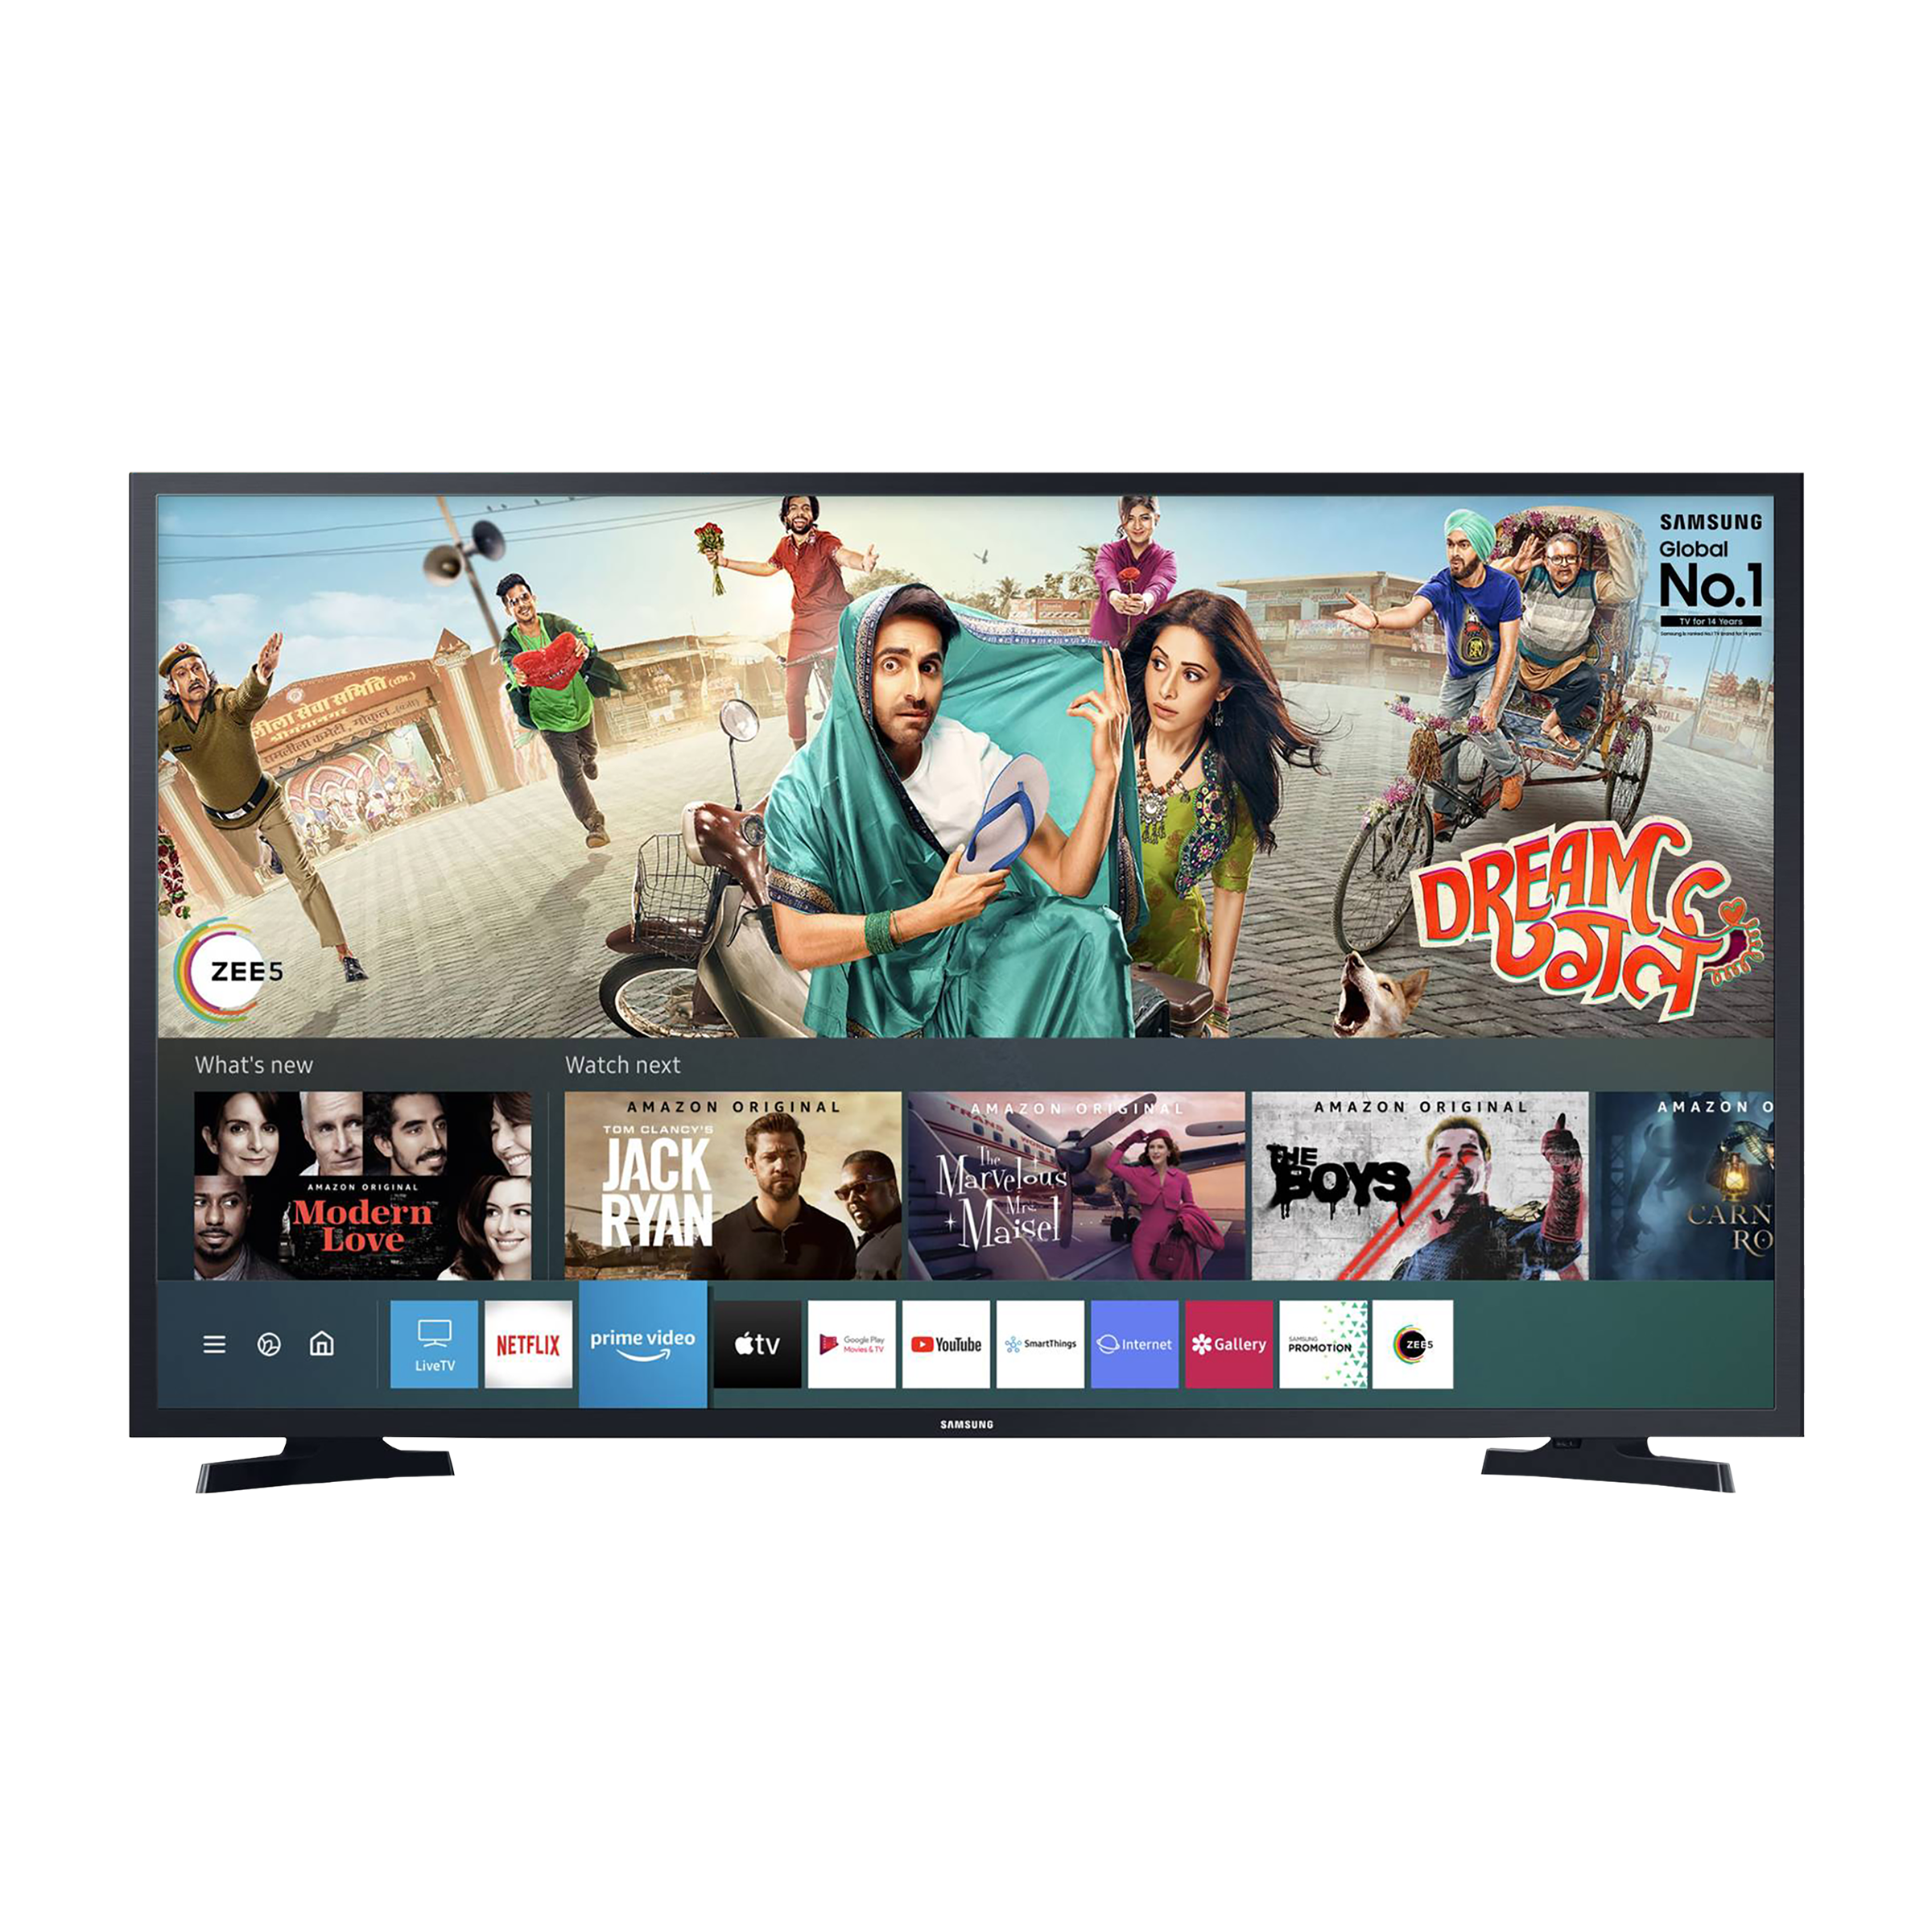 SAMSUNG Series 5 108 cm (43 inch) Full HD LED Smart Tizen TV with Google Assistant (2020 model)_1